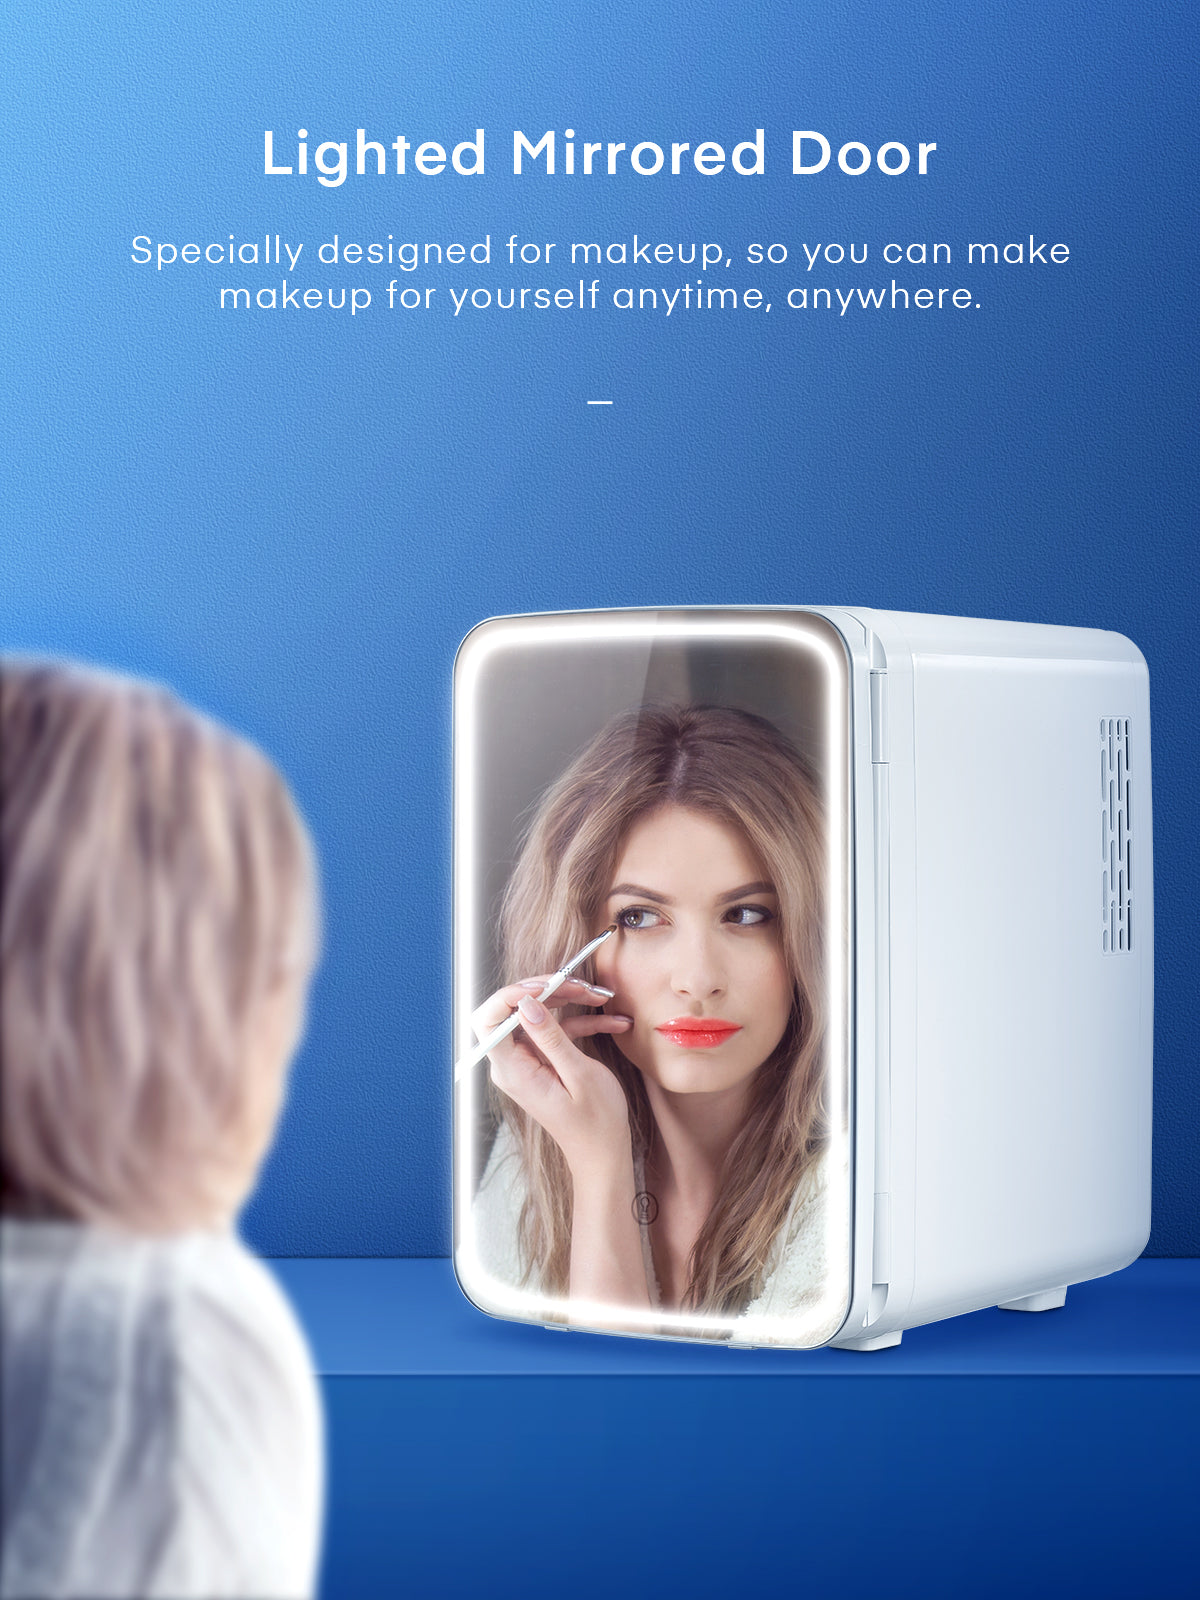 FOHERE 10L/11 Cans Mini Skincare Fridge with Mirror, 3-Mode LED, AC/DC, Portable Cooler & Warmer, Small Refrigerator for Skin Care Cosmetic Makeup, for Office Bedroom Dorm Car, White